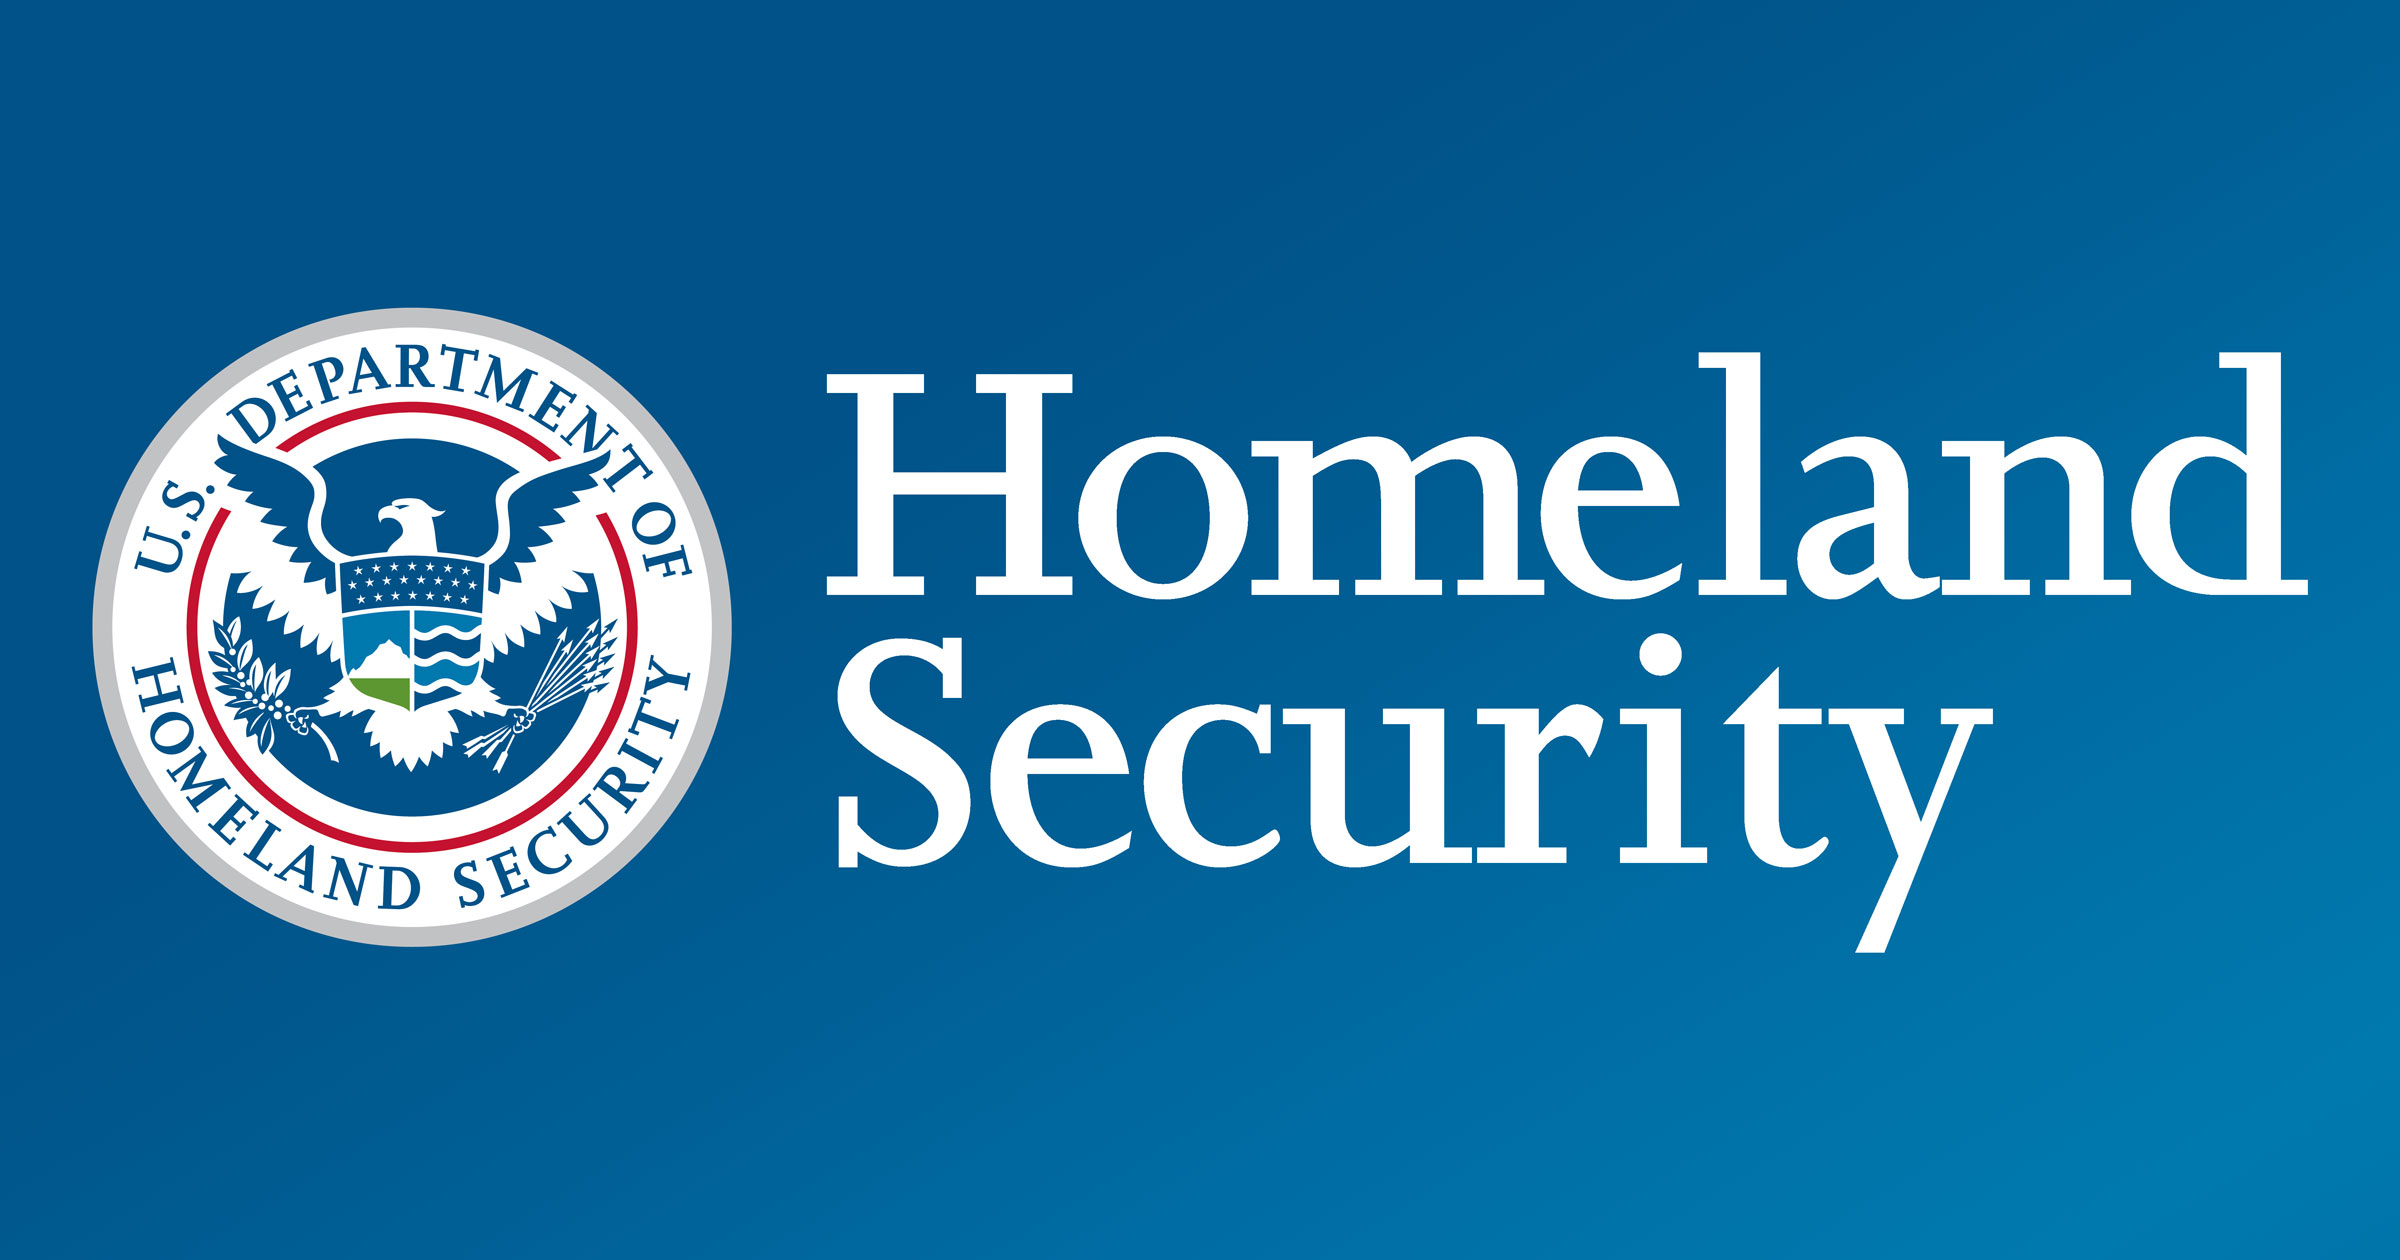 About Dhs Homeland Security